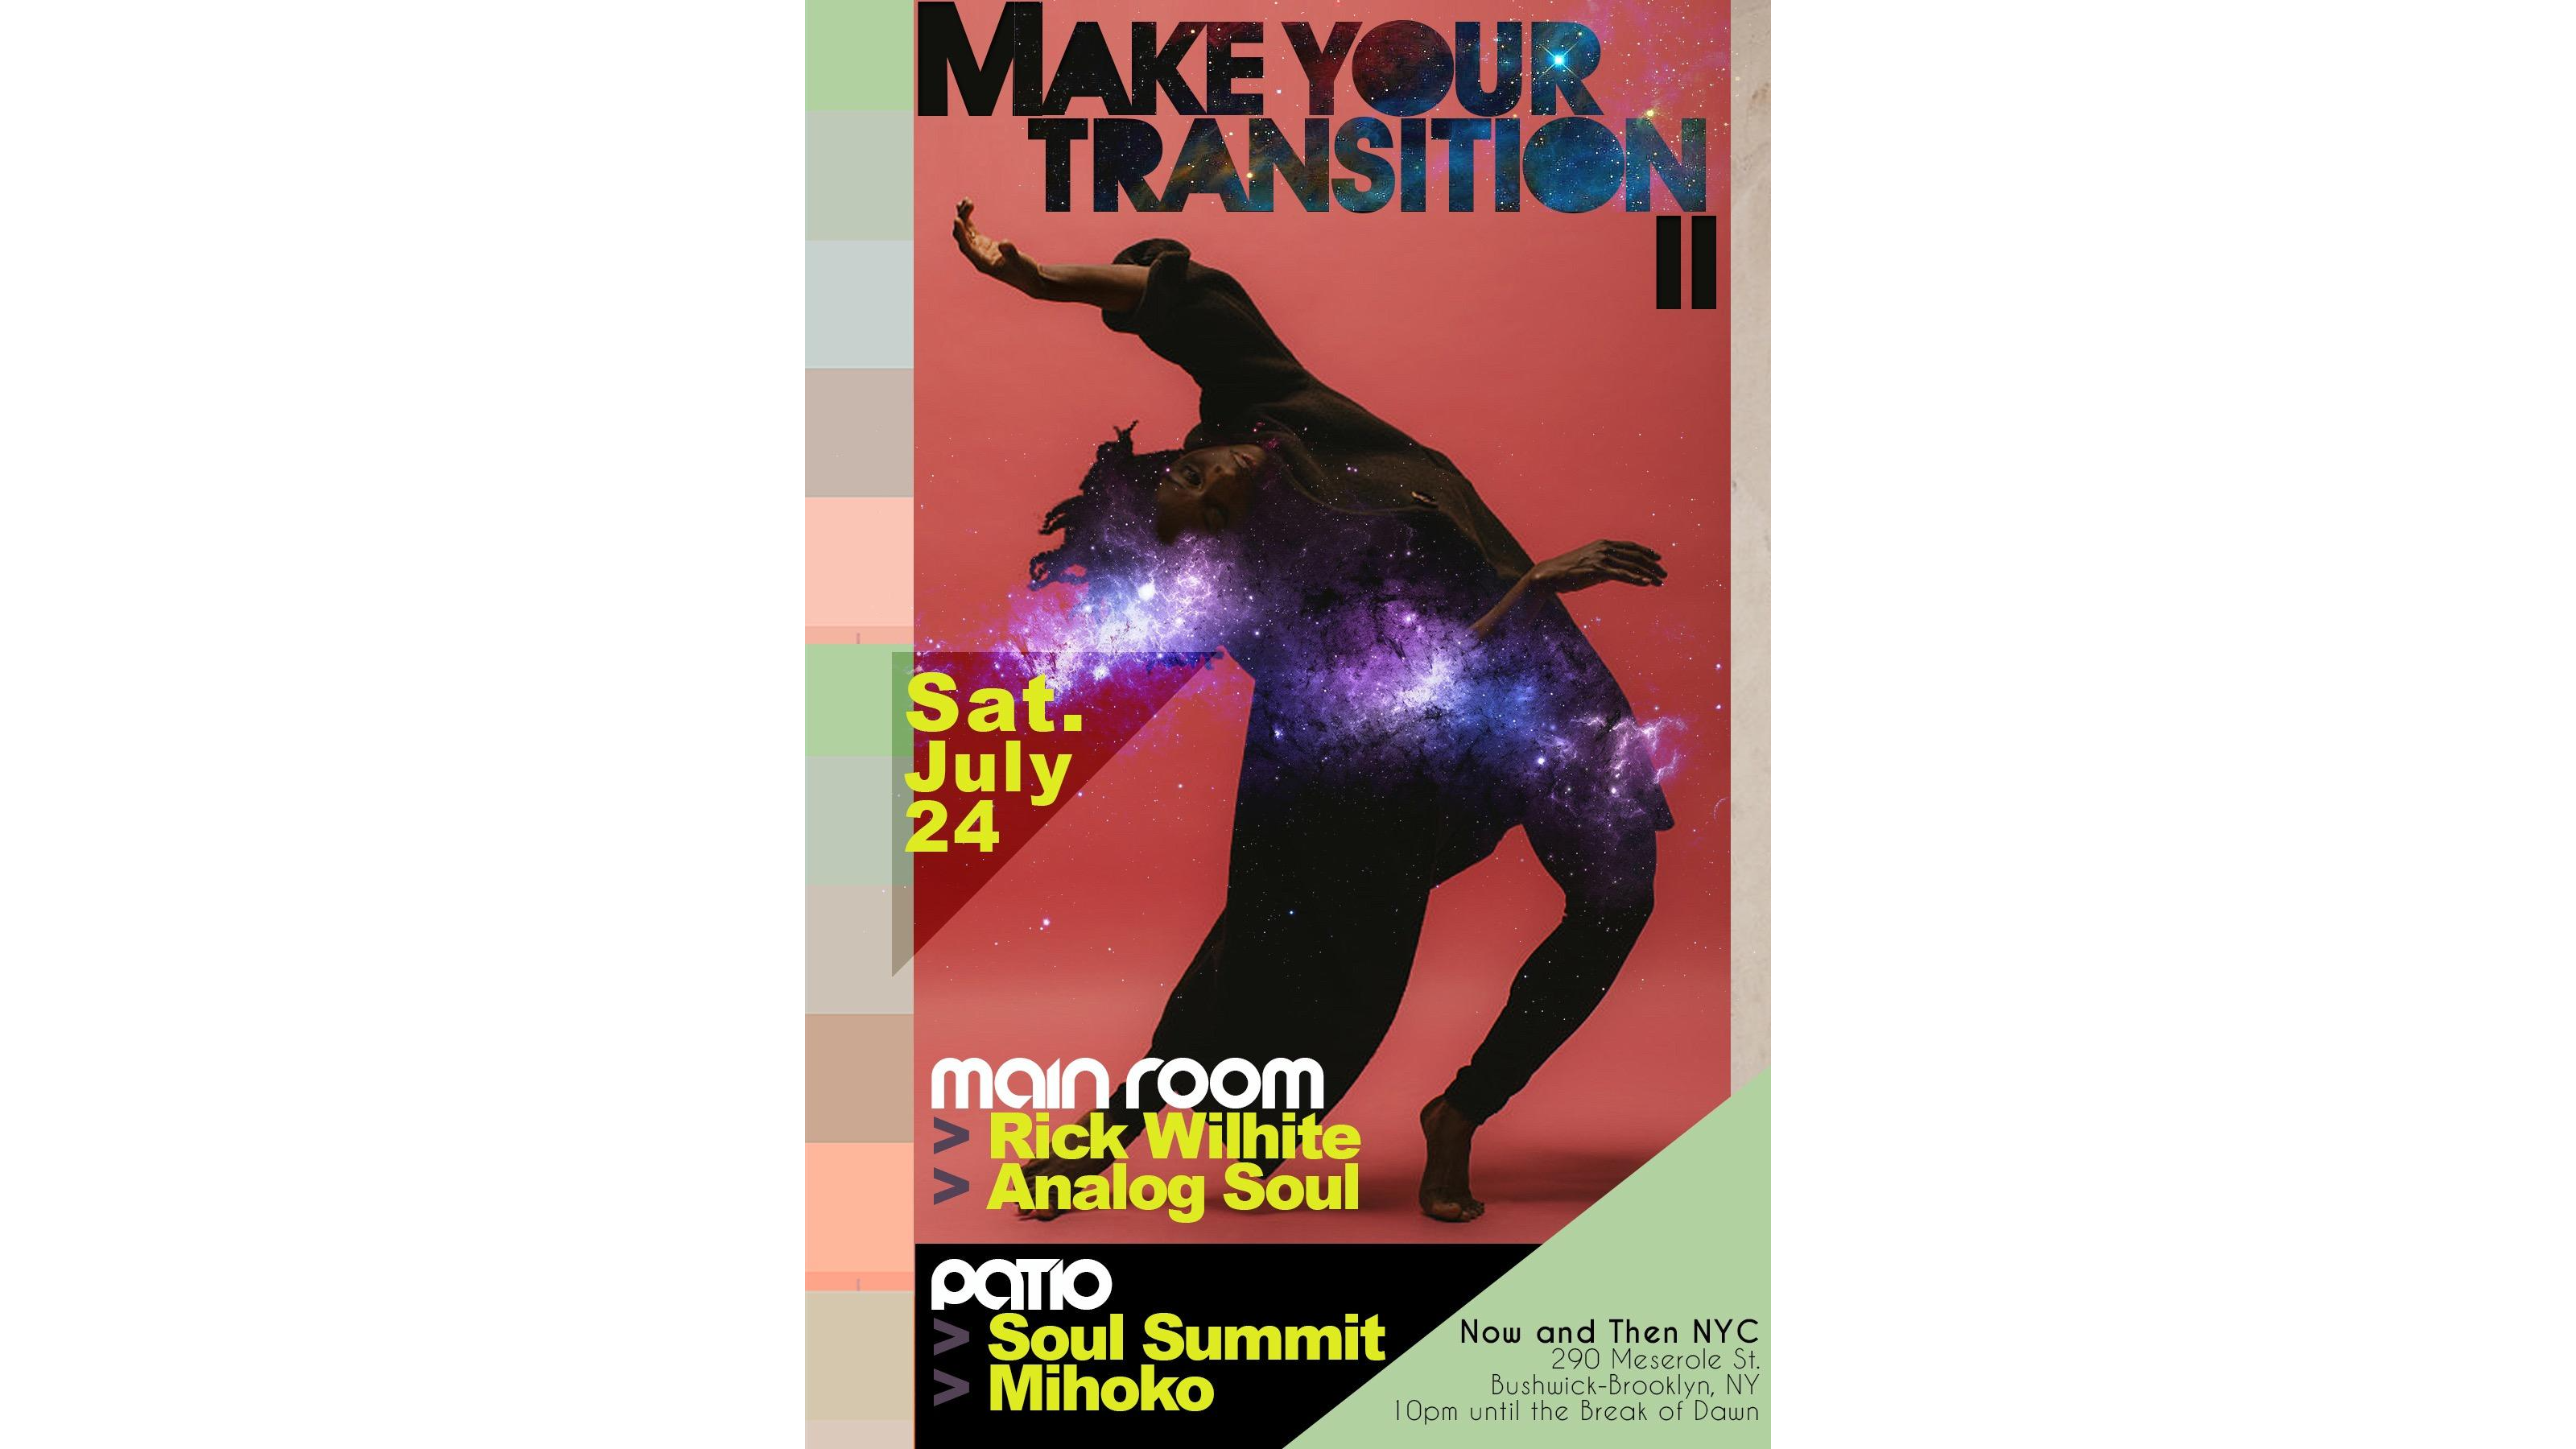 Photo for Make Your Transition with Rick Wilhite, Analog Soul, Soul Summit and Mihoko on ViewStub